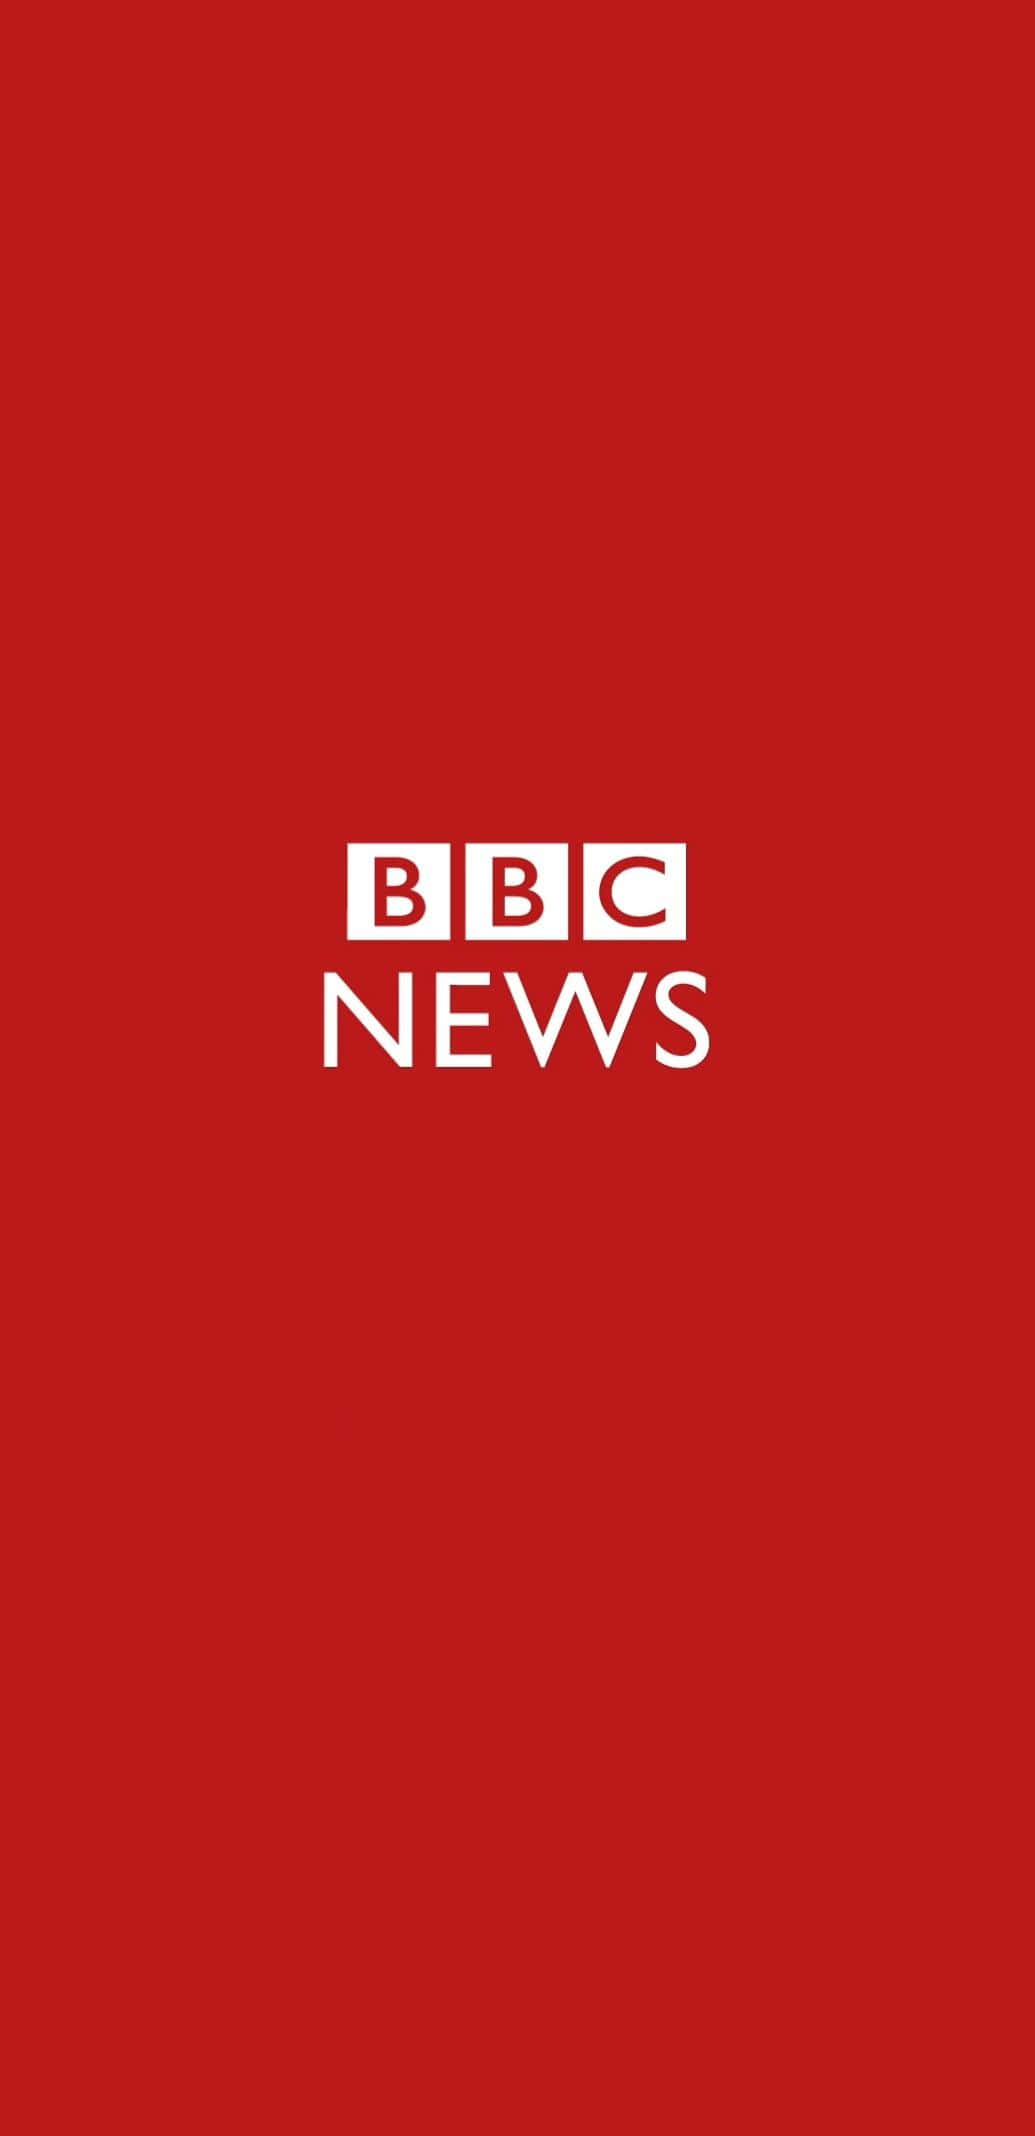 Breaking news from around the world with BBC News